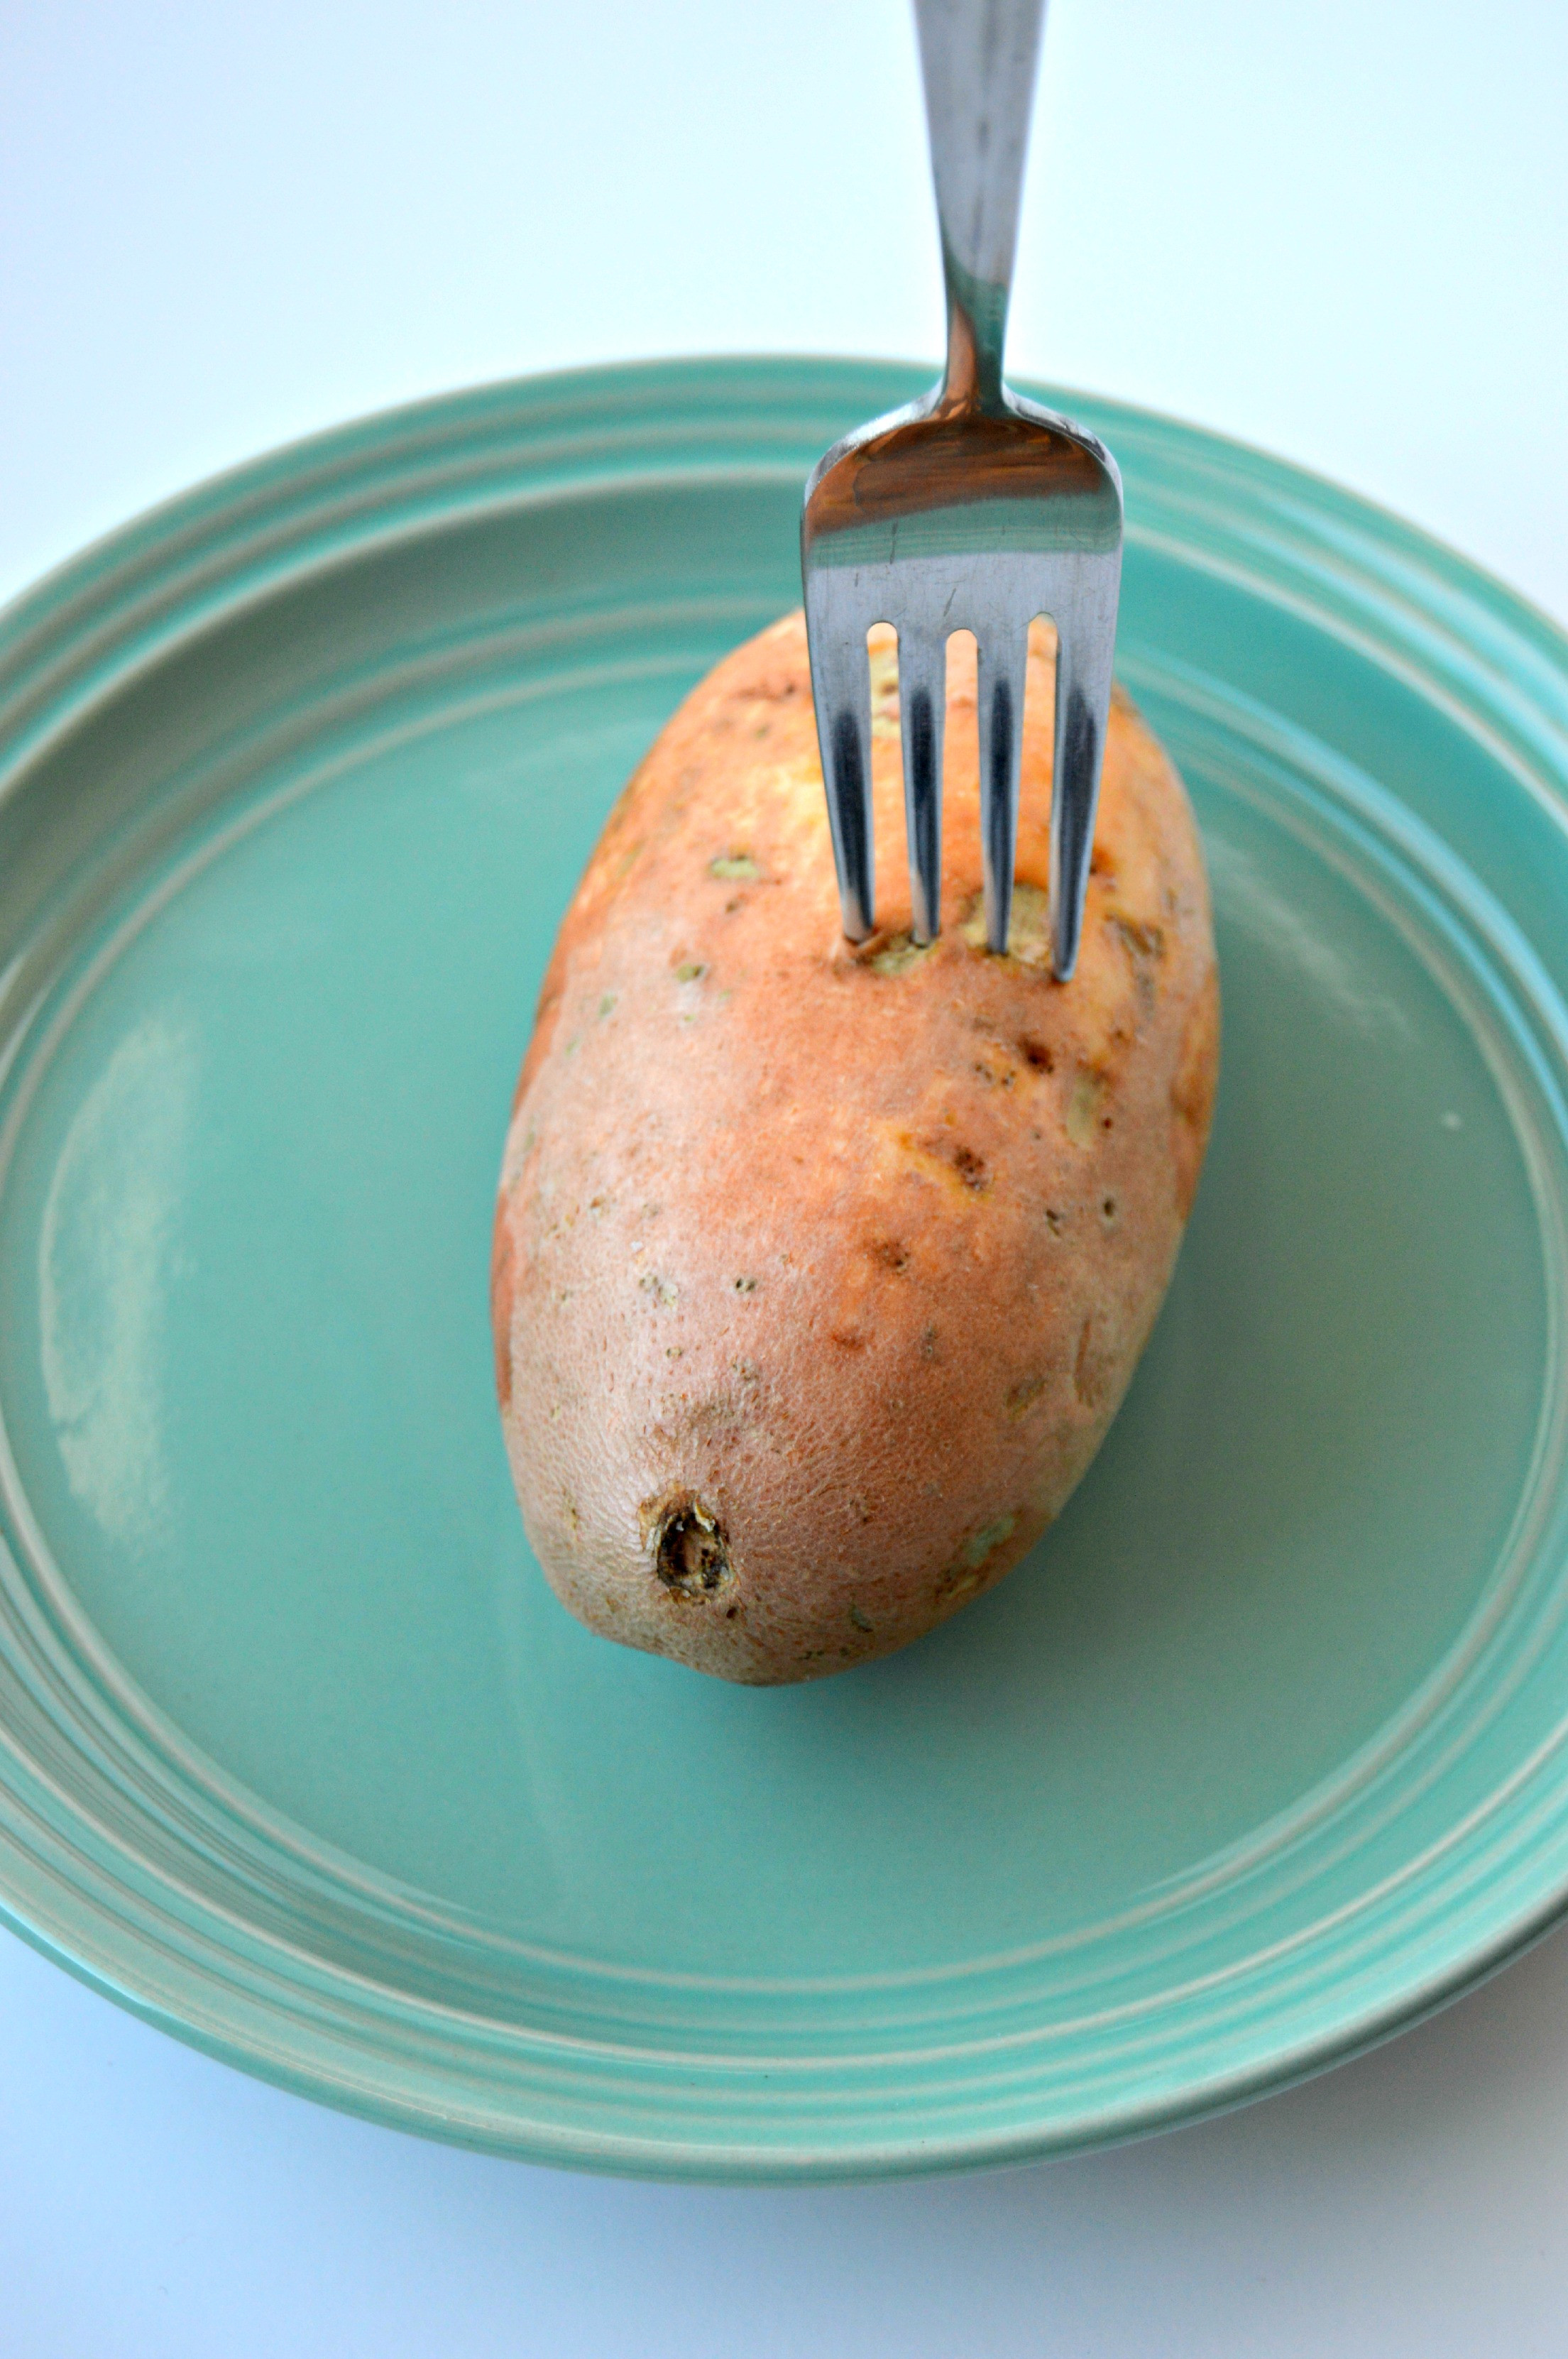 Microwave Sweet Potato
 How to Make a Baked Sweet Potato in the Microwave Clean